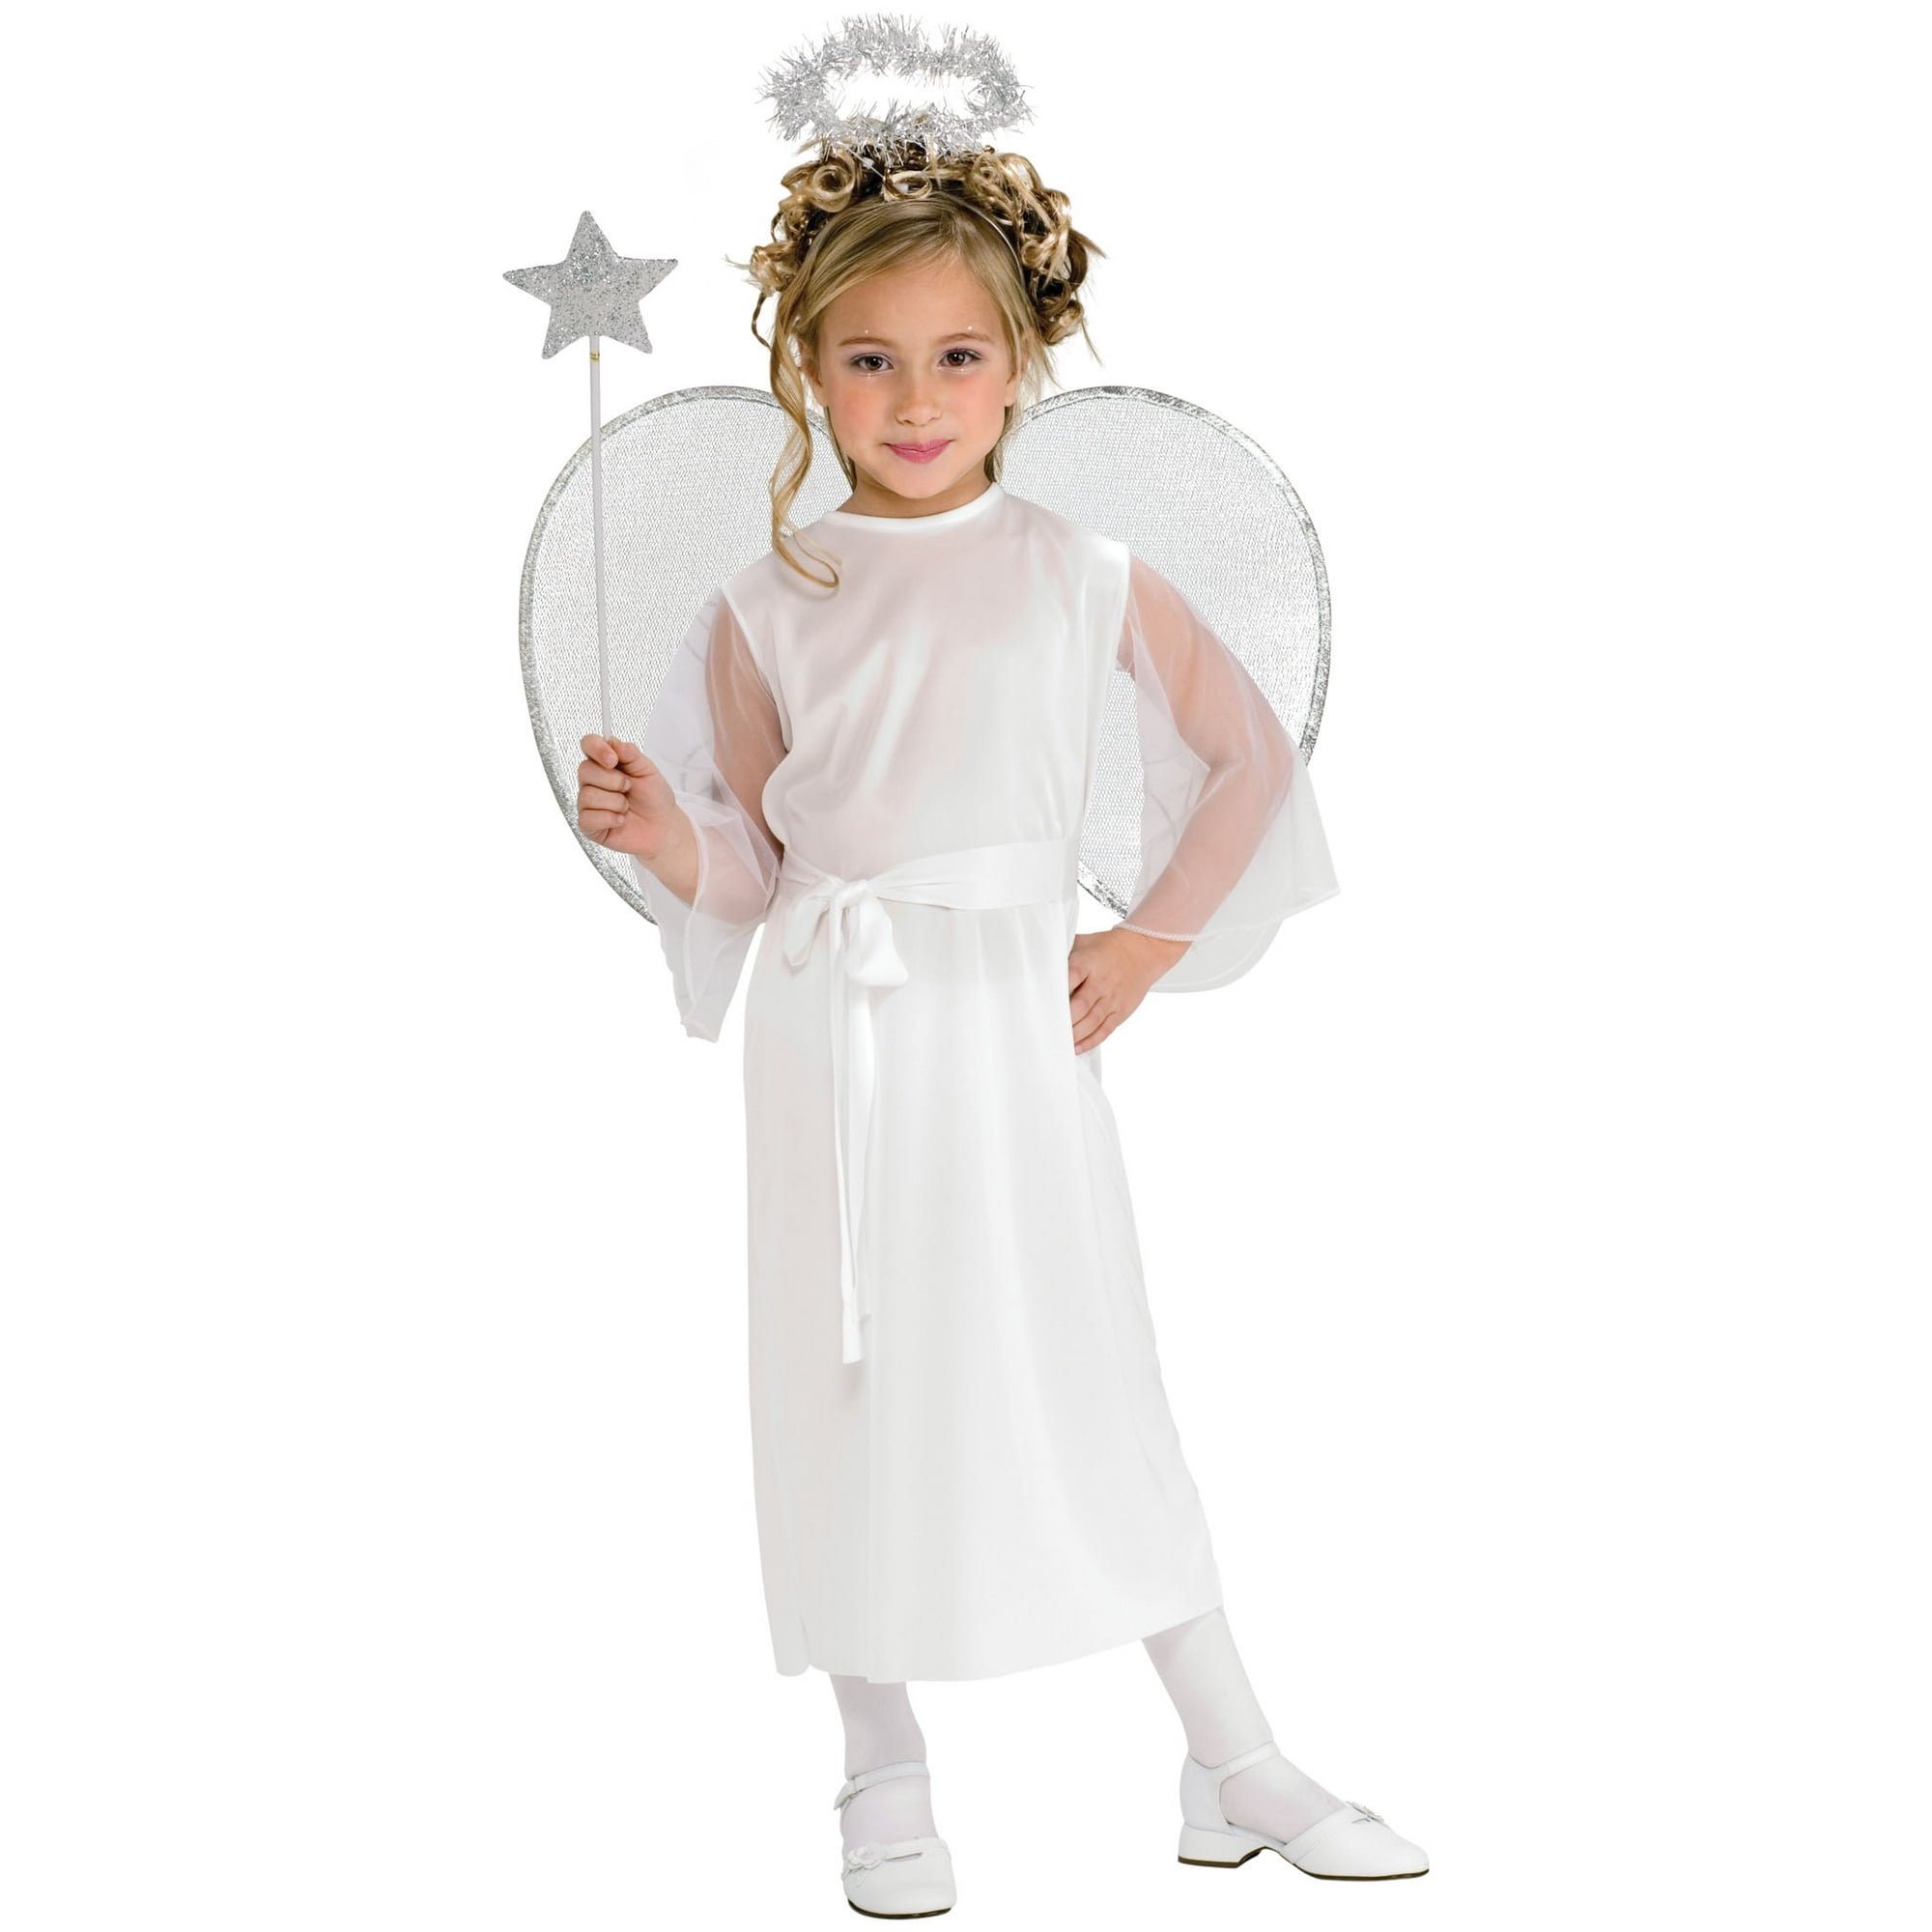 Girls Angel Halloween Costume, by Way To Celebrate, Size S